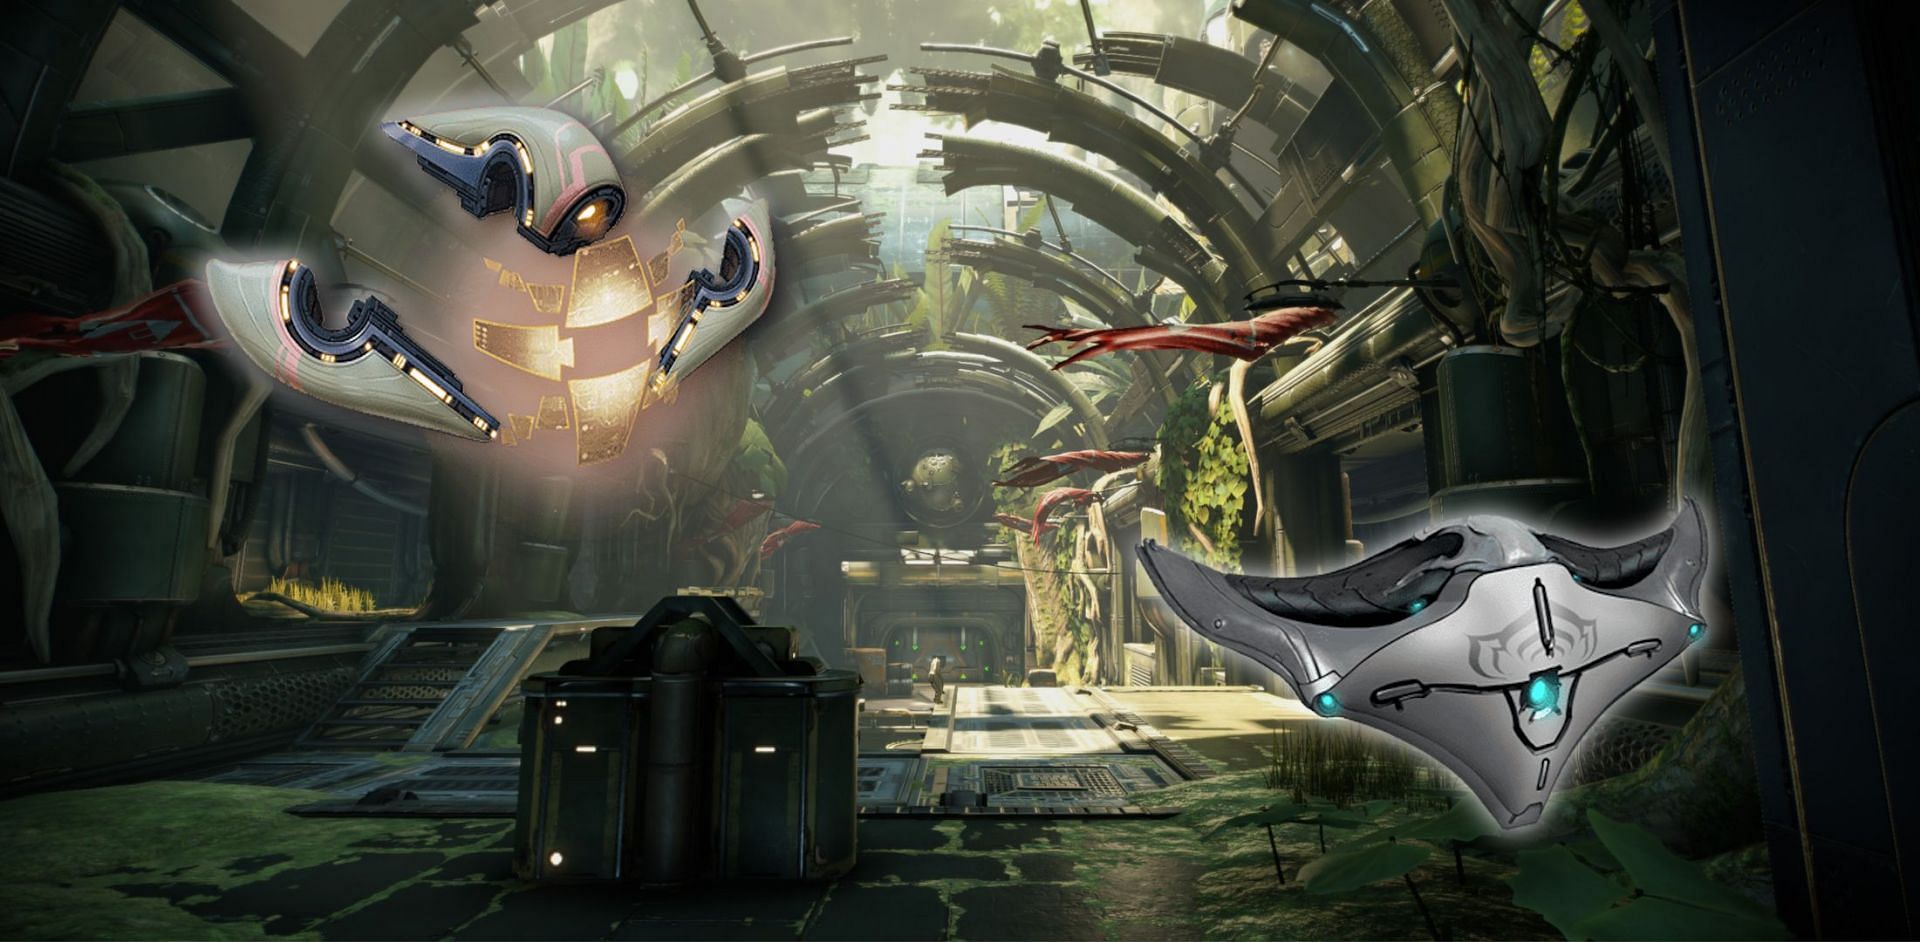 Warframe synthesis codex scanner and codex scanner in the foreground with a concept art for Earth in the background